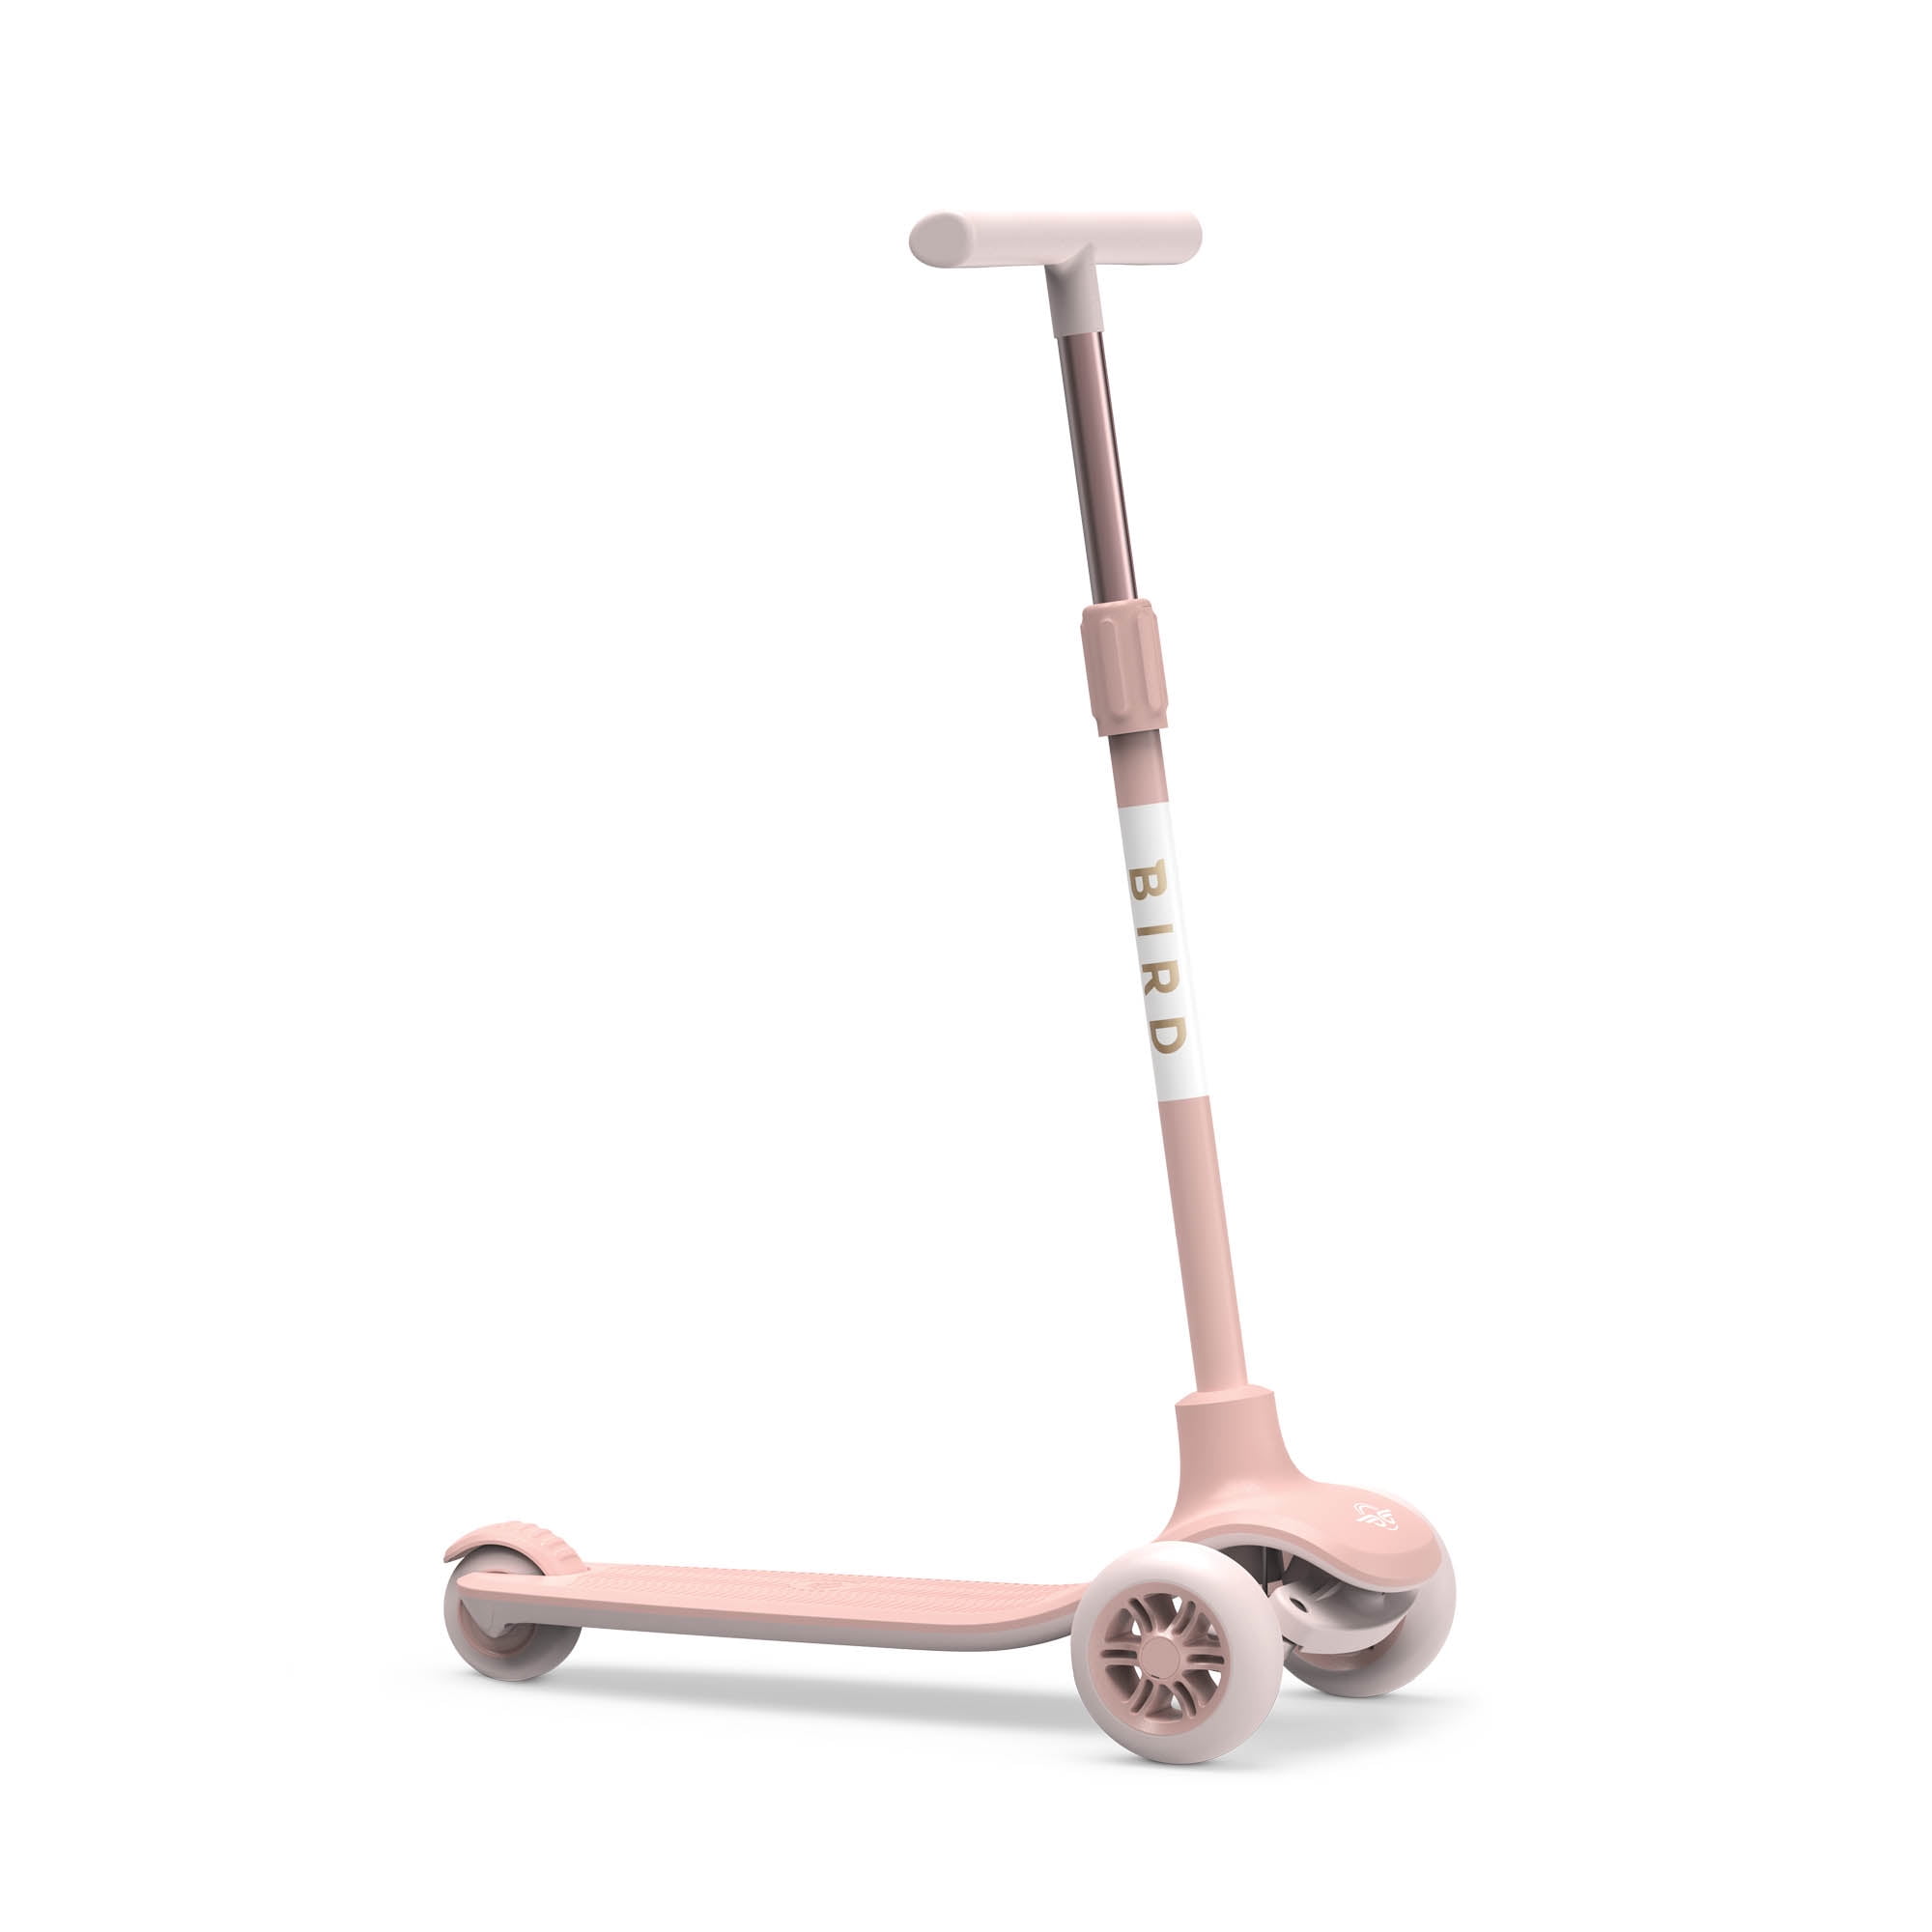 kid-powered for ages 3+; Brand New IB Birdie LIMITED EDITION Scooter by BIRD 